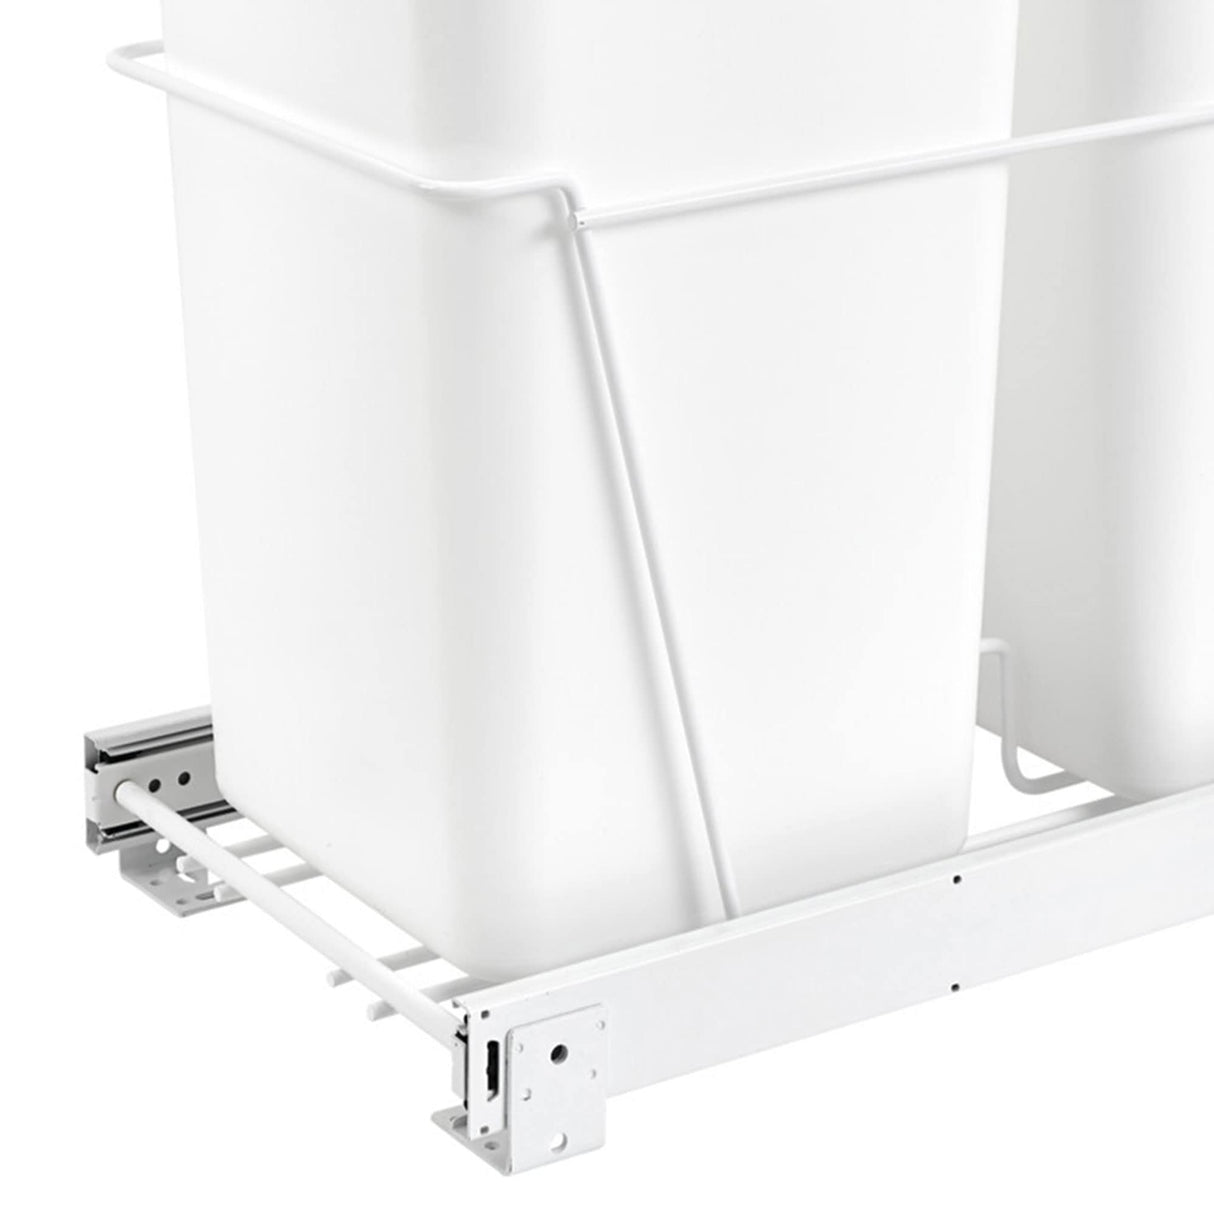 Rev-A-Shelf Double 27 Qt Pull Out Chrome Wire Trash Can Container Bin Bottom Mount for Kitchen Cabinet with Full-Extension Slides, White, RV-15PB-2 S